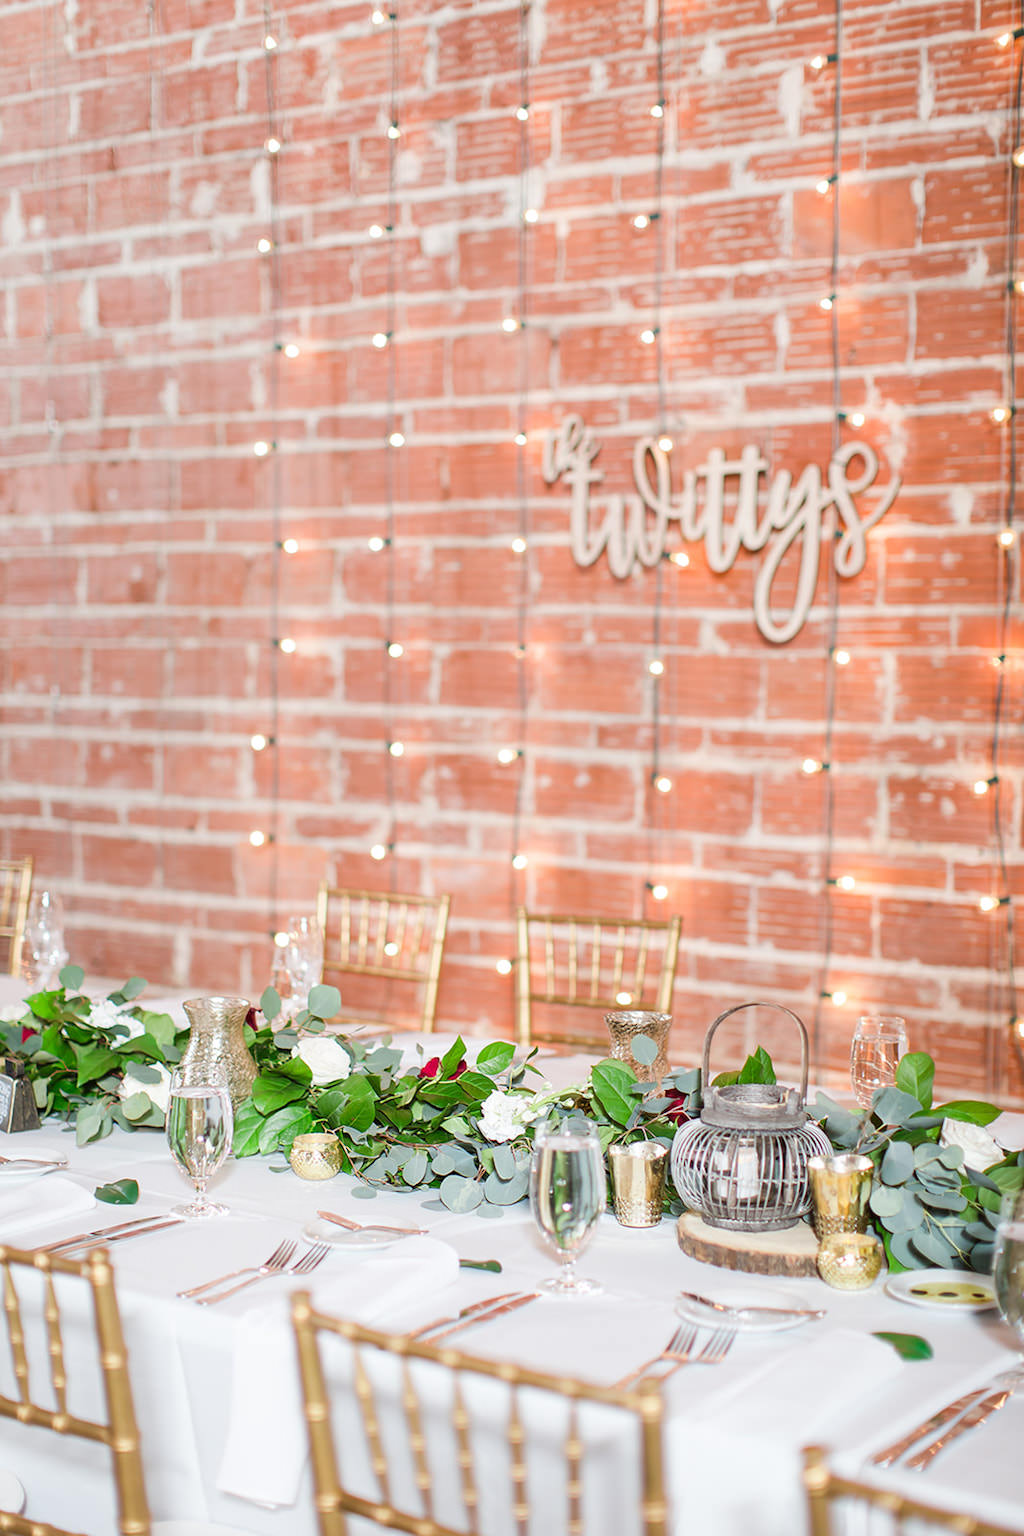 Rustic Chic Inspired Wedding Decor at Feasting Table, Romantic Greenery Eucalyptus Leaves Garland Centerpiece, Nature Inspired Lanterns, Gold Chiavari Chairs, Against Exposed Red Brick Wall with Indoor String Lighting | Florida Historic Wedding Venue NOVA 535 | St. Petersburg Wedding Photographers Shauna and Jordon Photography